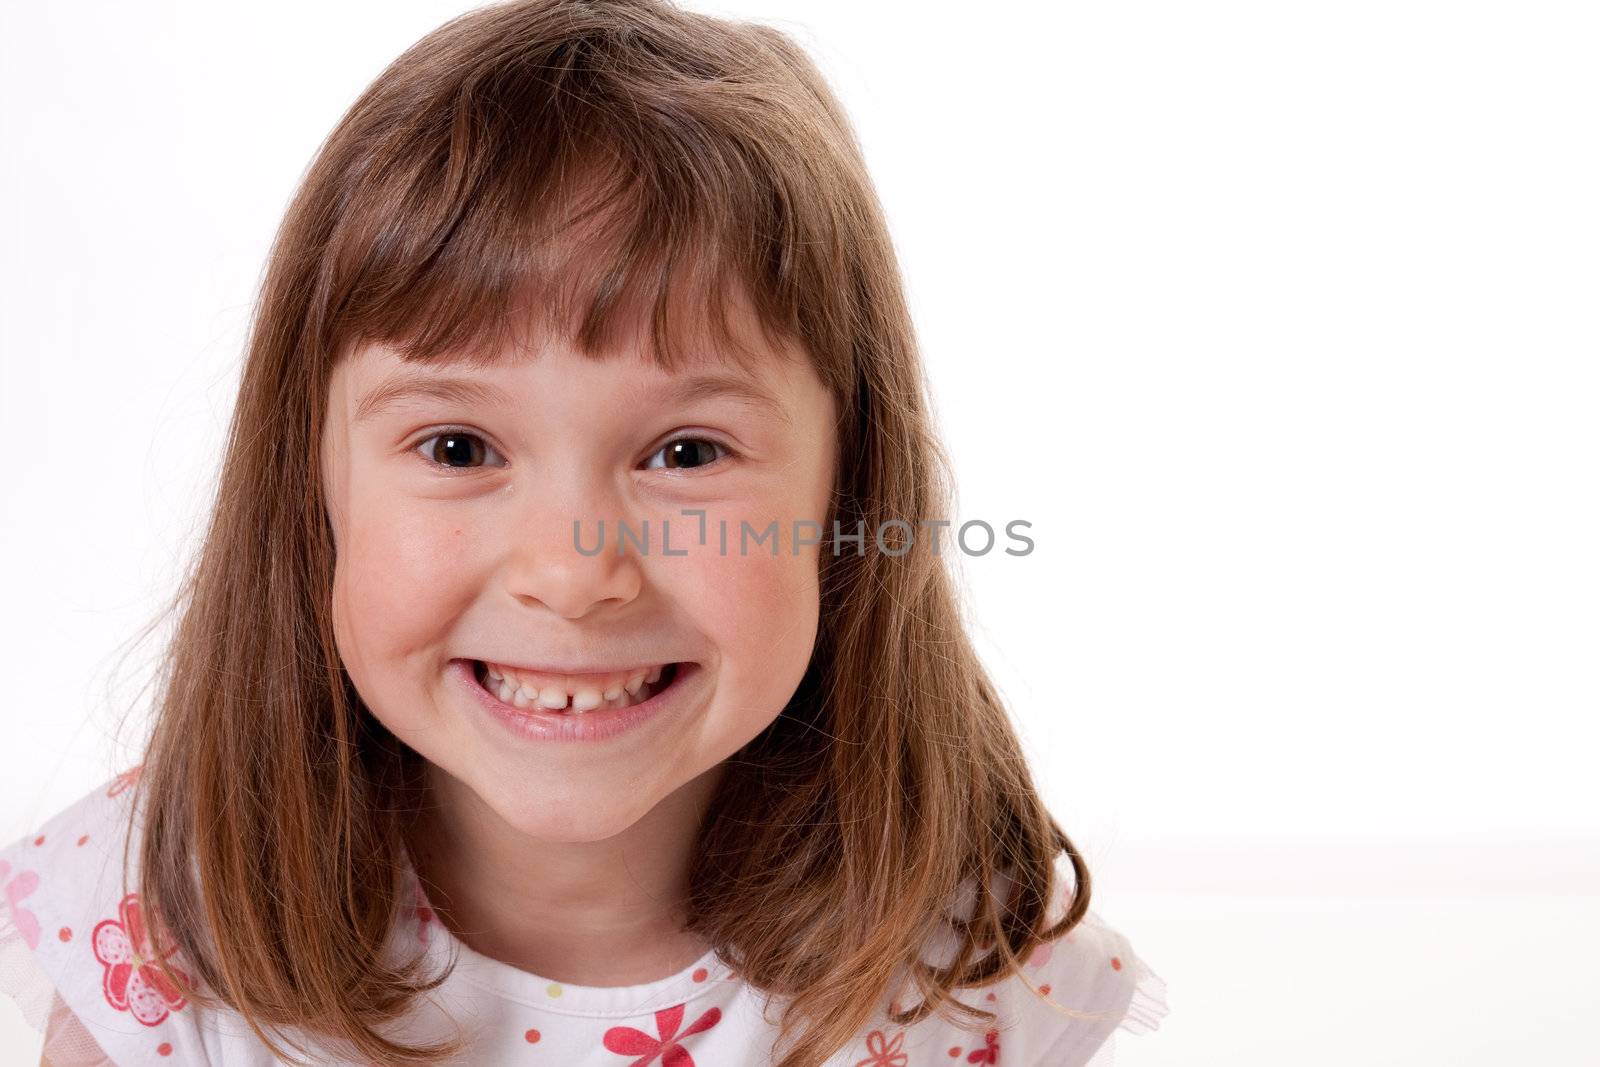 Little girl with a happy expression